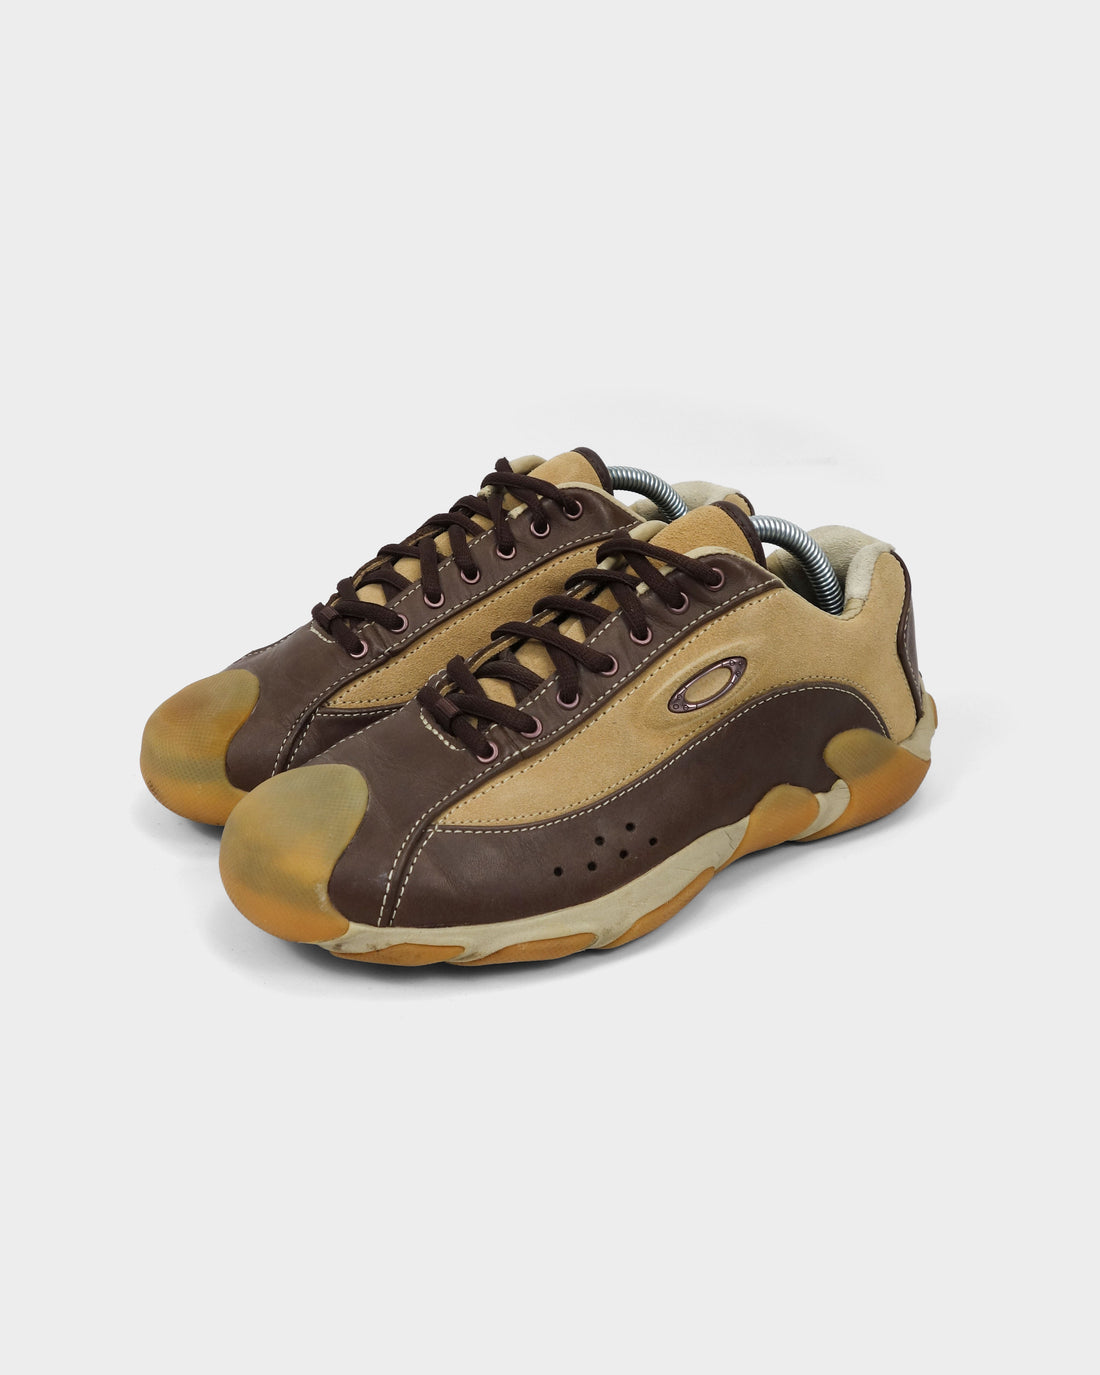 Oakley Twitch Brown Suede Sneakers 2000's